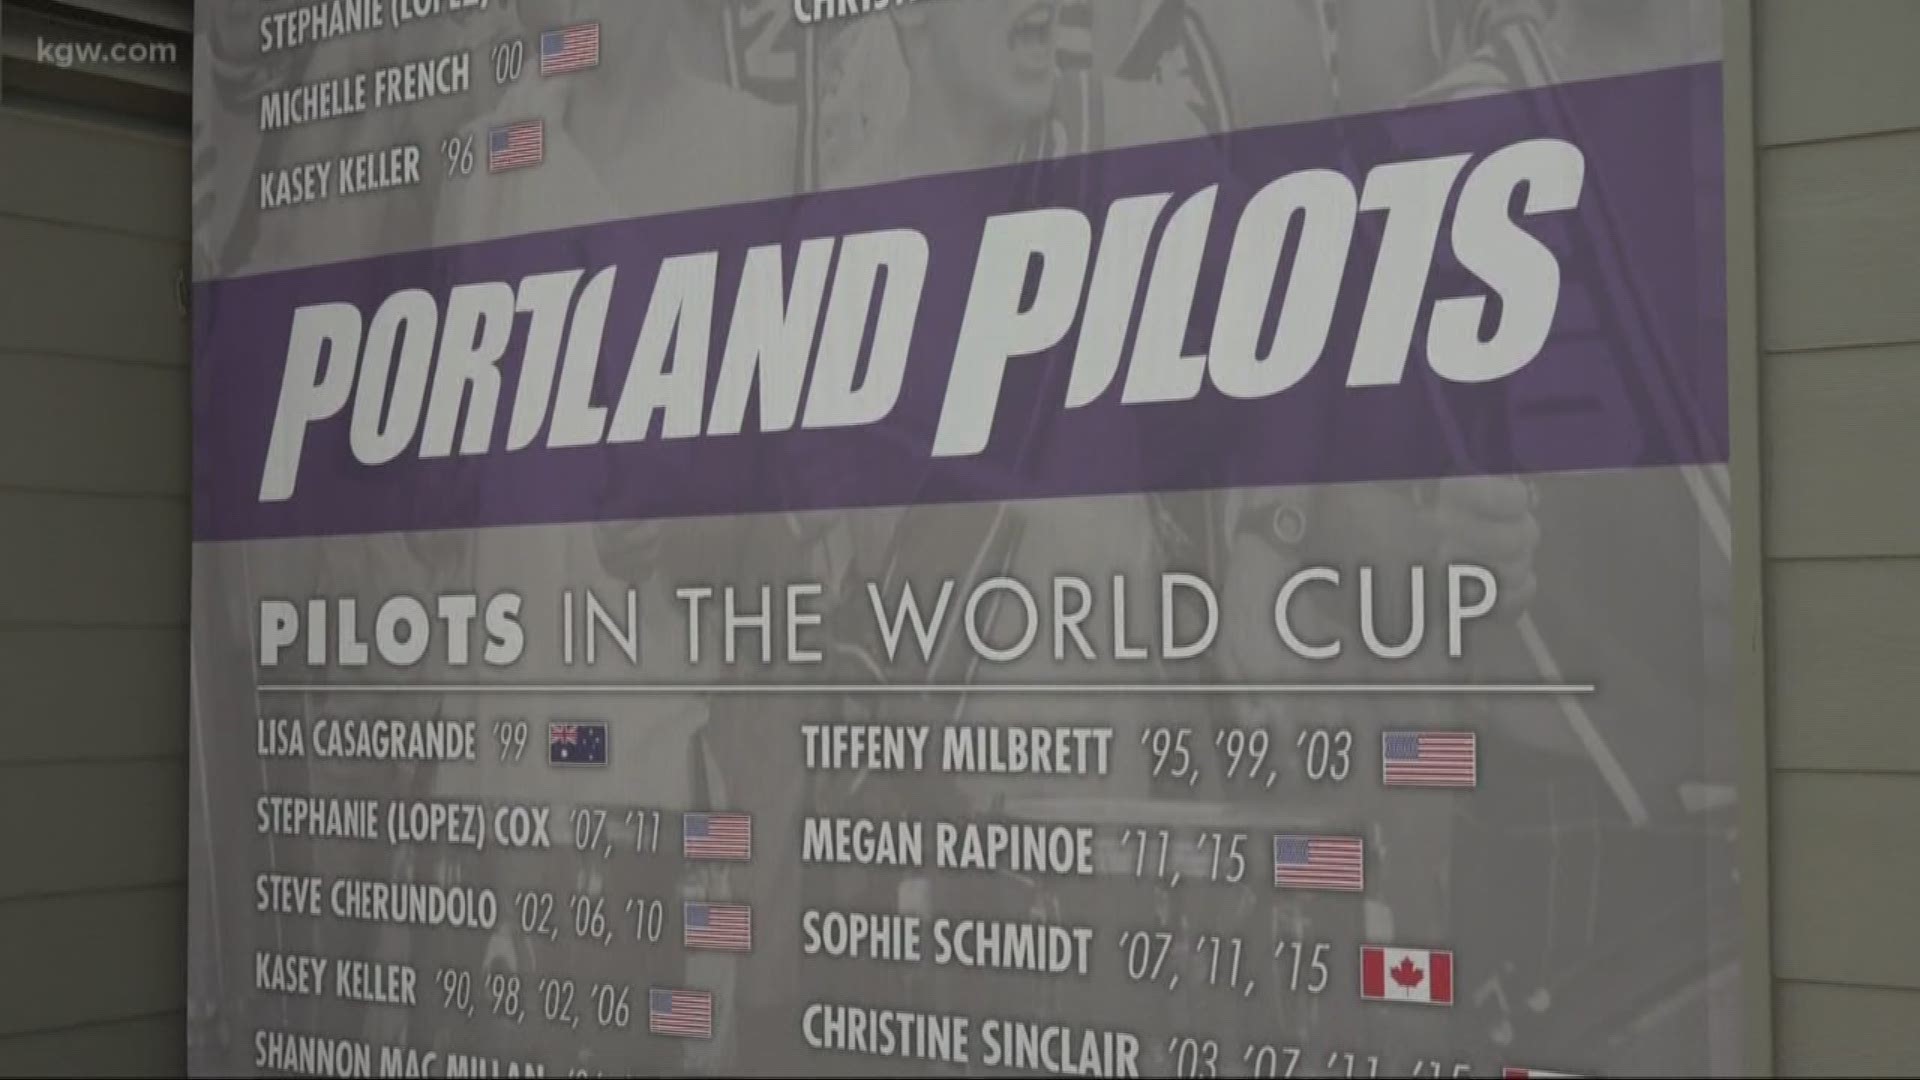 The University of Portland has pumped out an incredible list of soccer World Cup players, including Megan Rapinoe for the U.S. and Christine Sinclair and Sophie Schmidt for Canada.